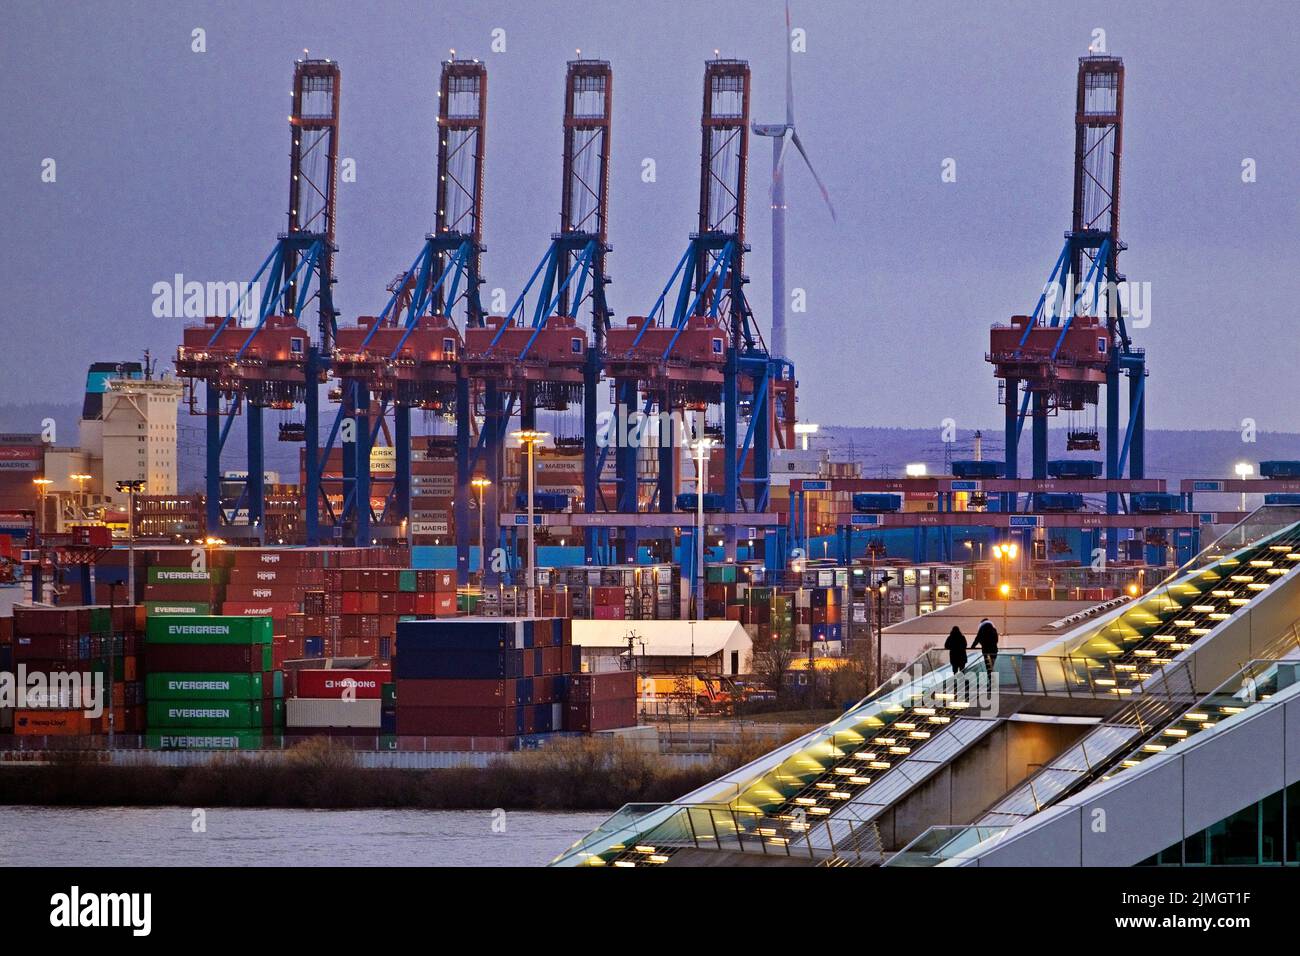 Loading cranes at the Burchardkai container terminal with people at Dockland, Hamburg, Germany Stock Photo